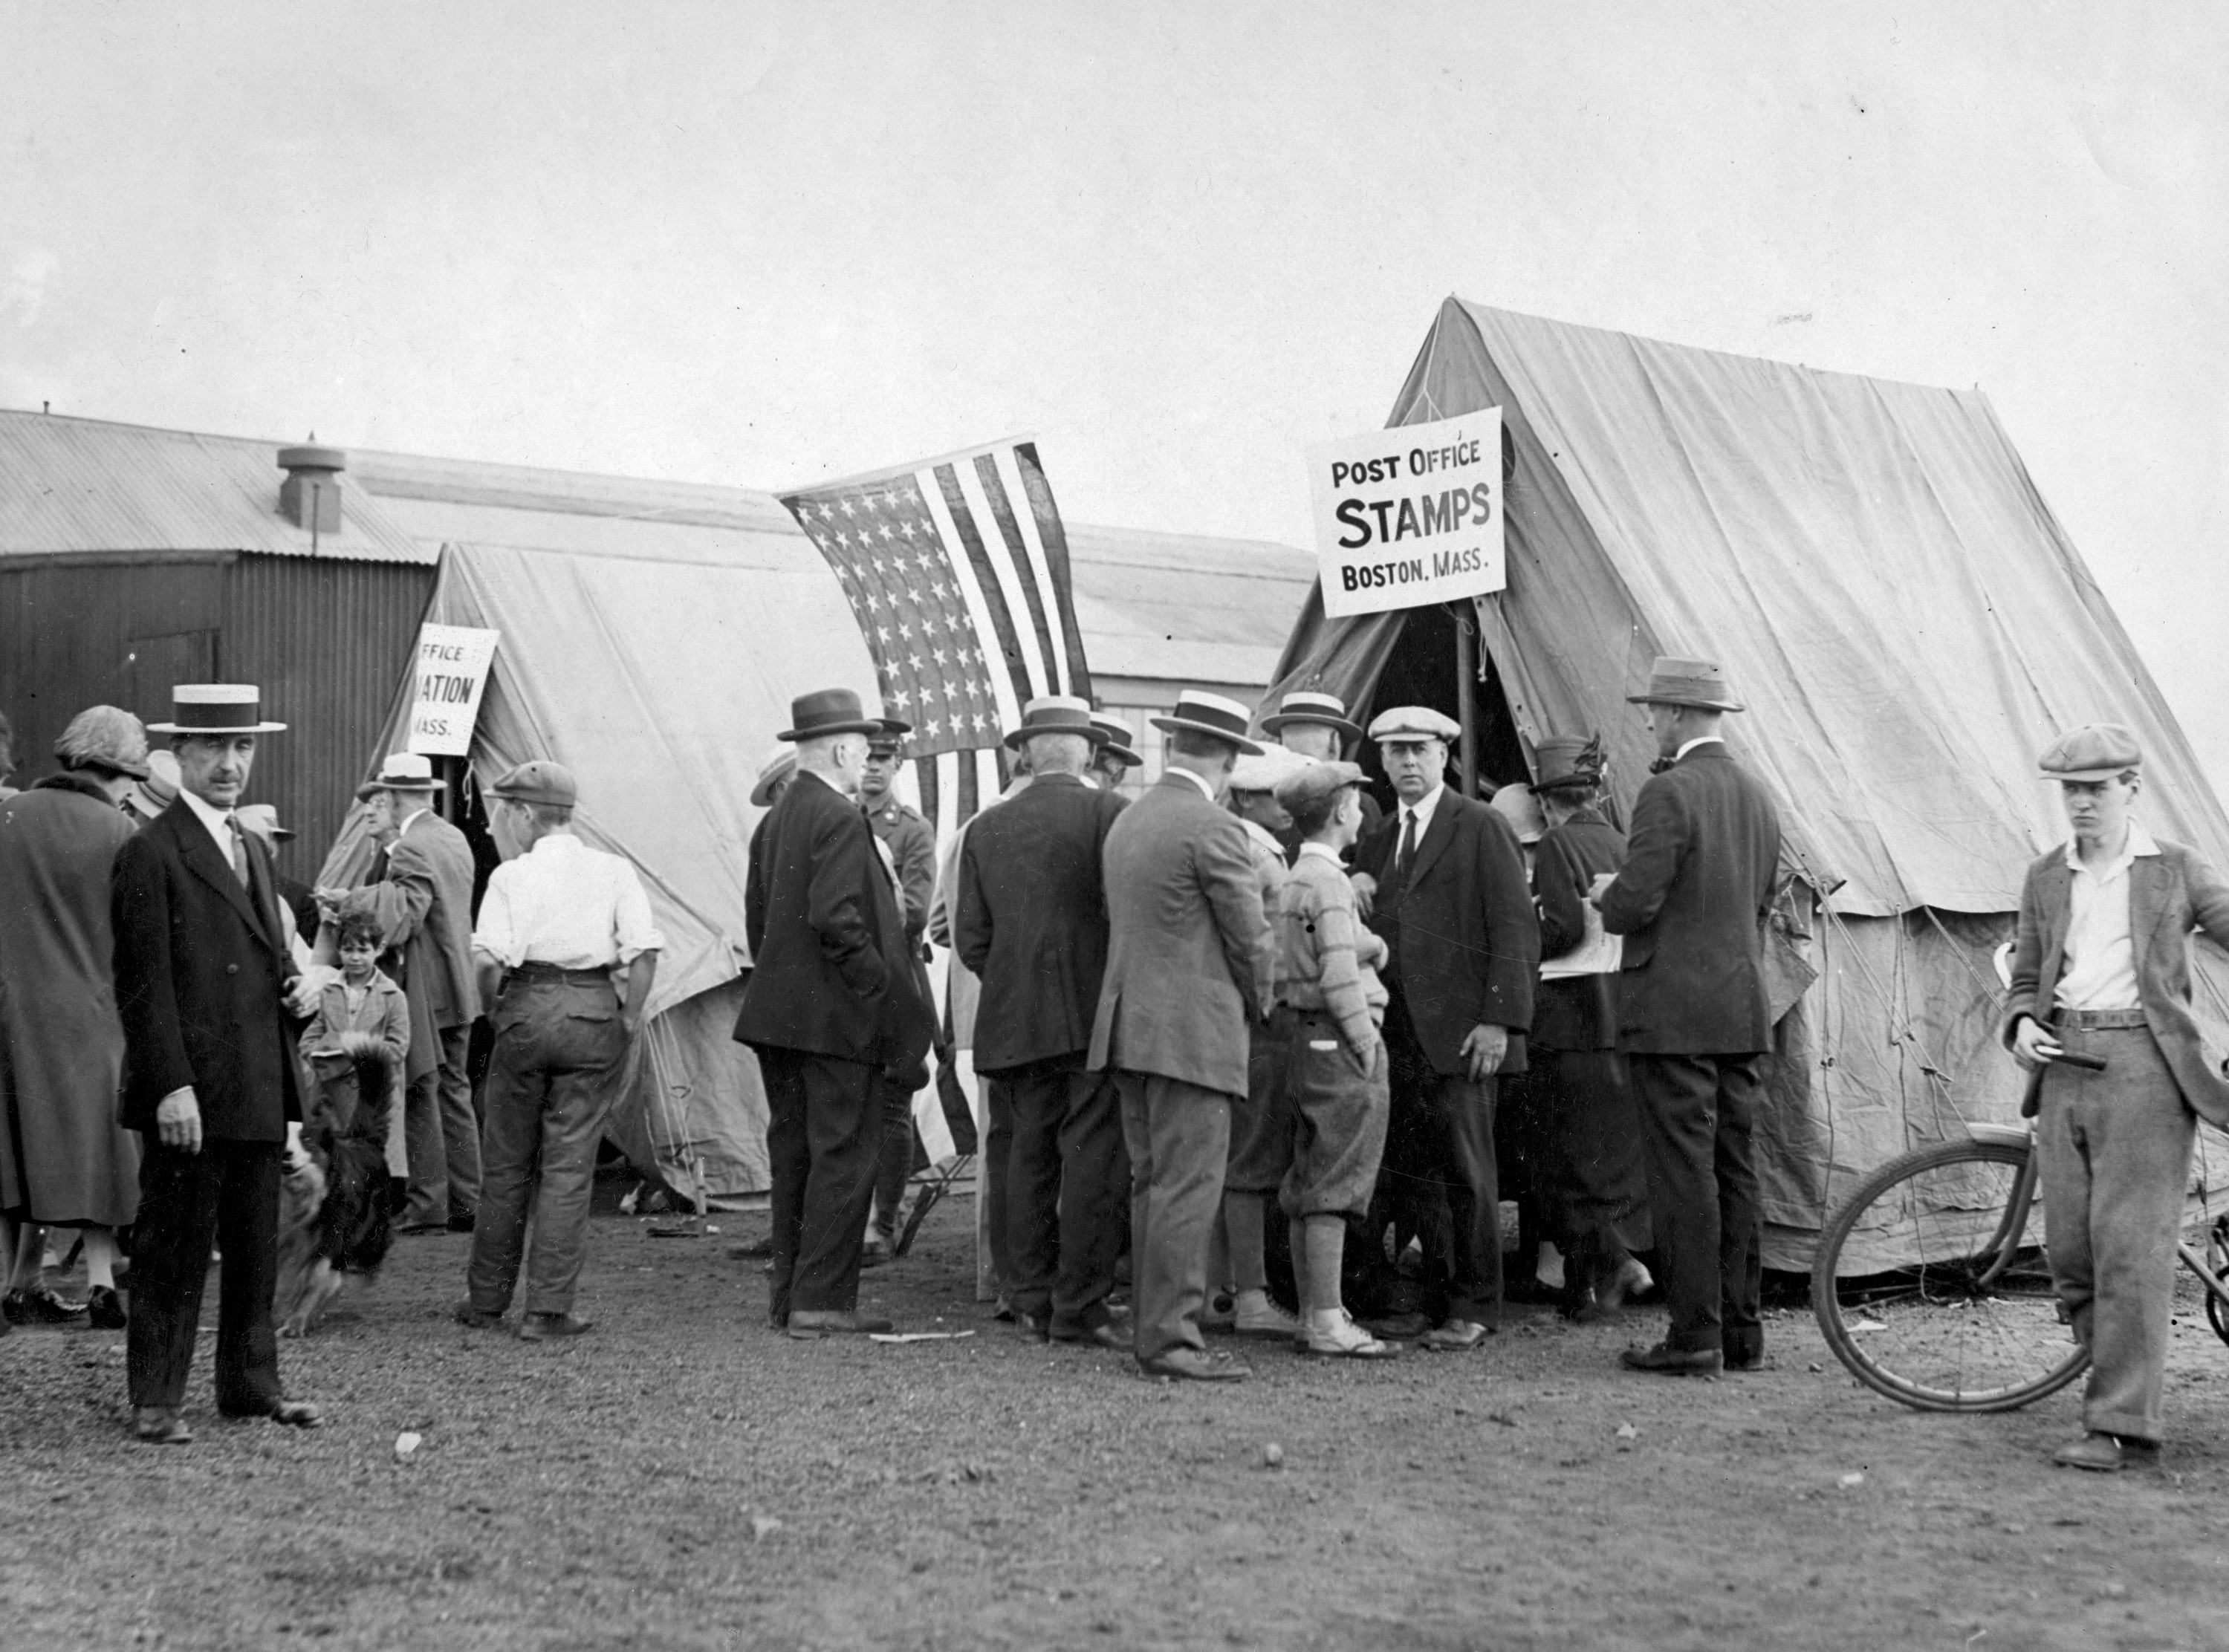 A crowd of people stand in front of a post office tent with a sign that says &quot;stamps&quot;